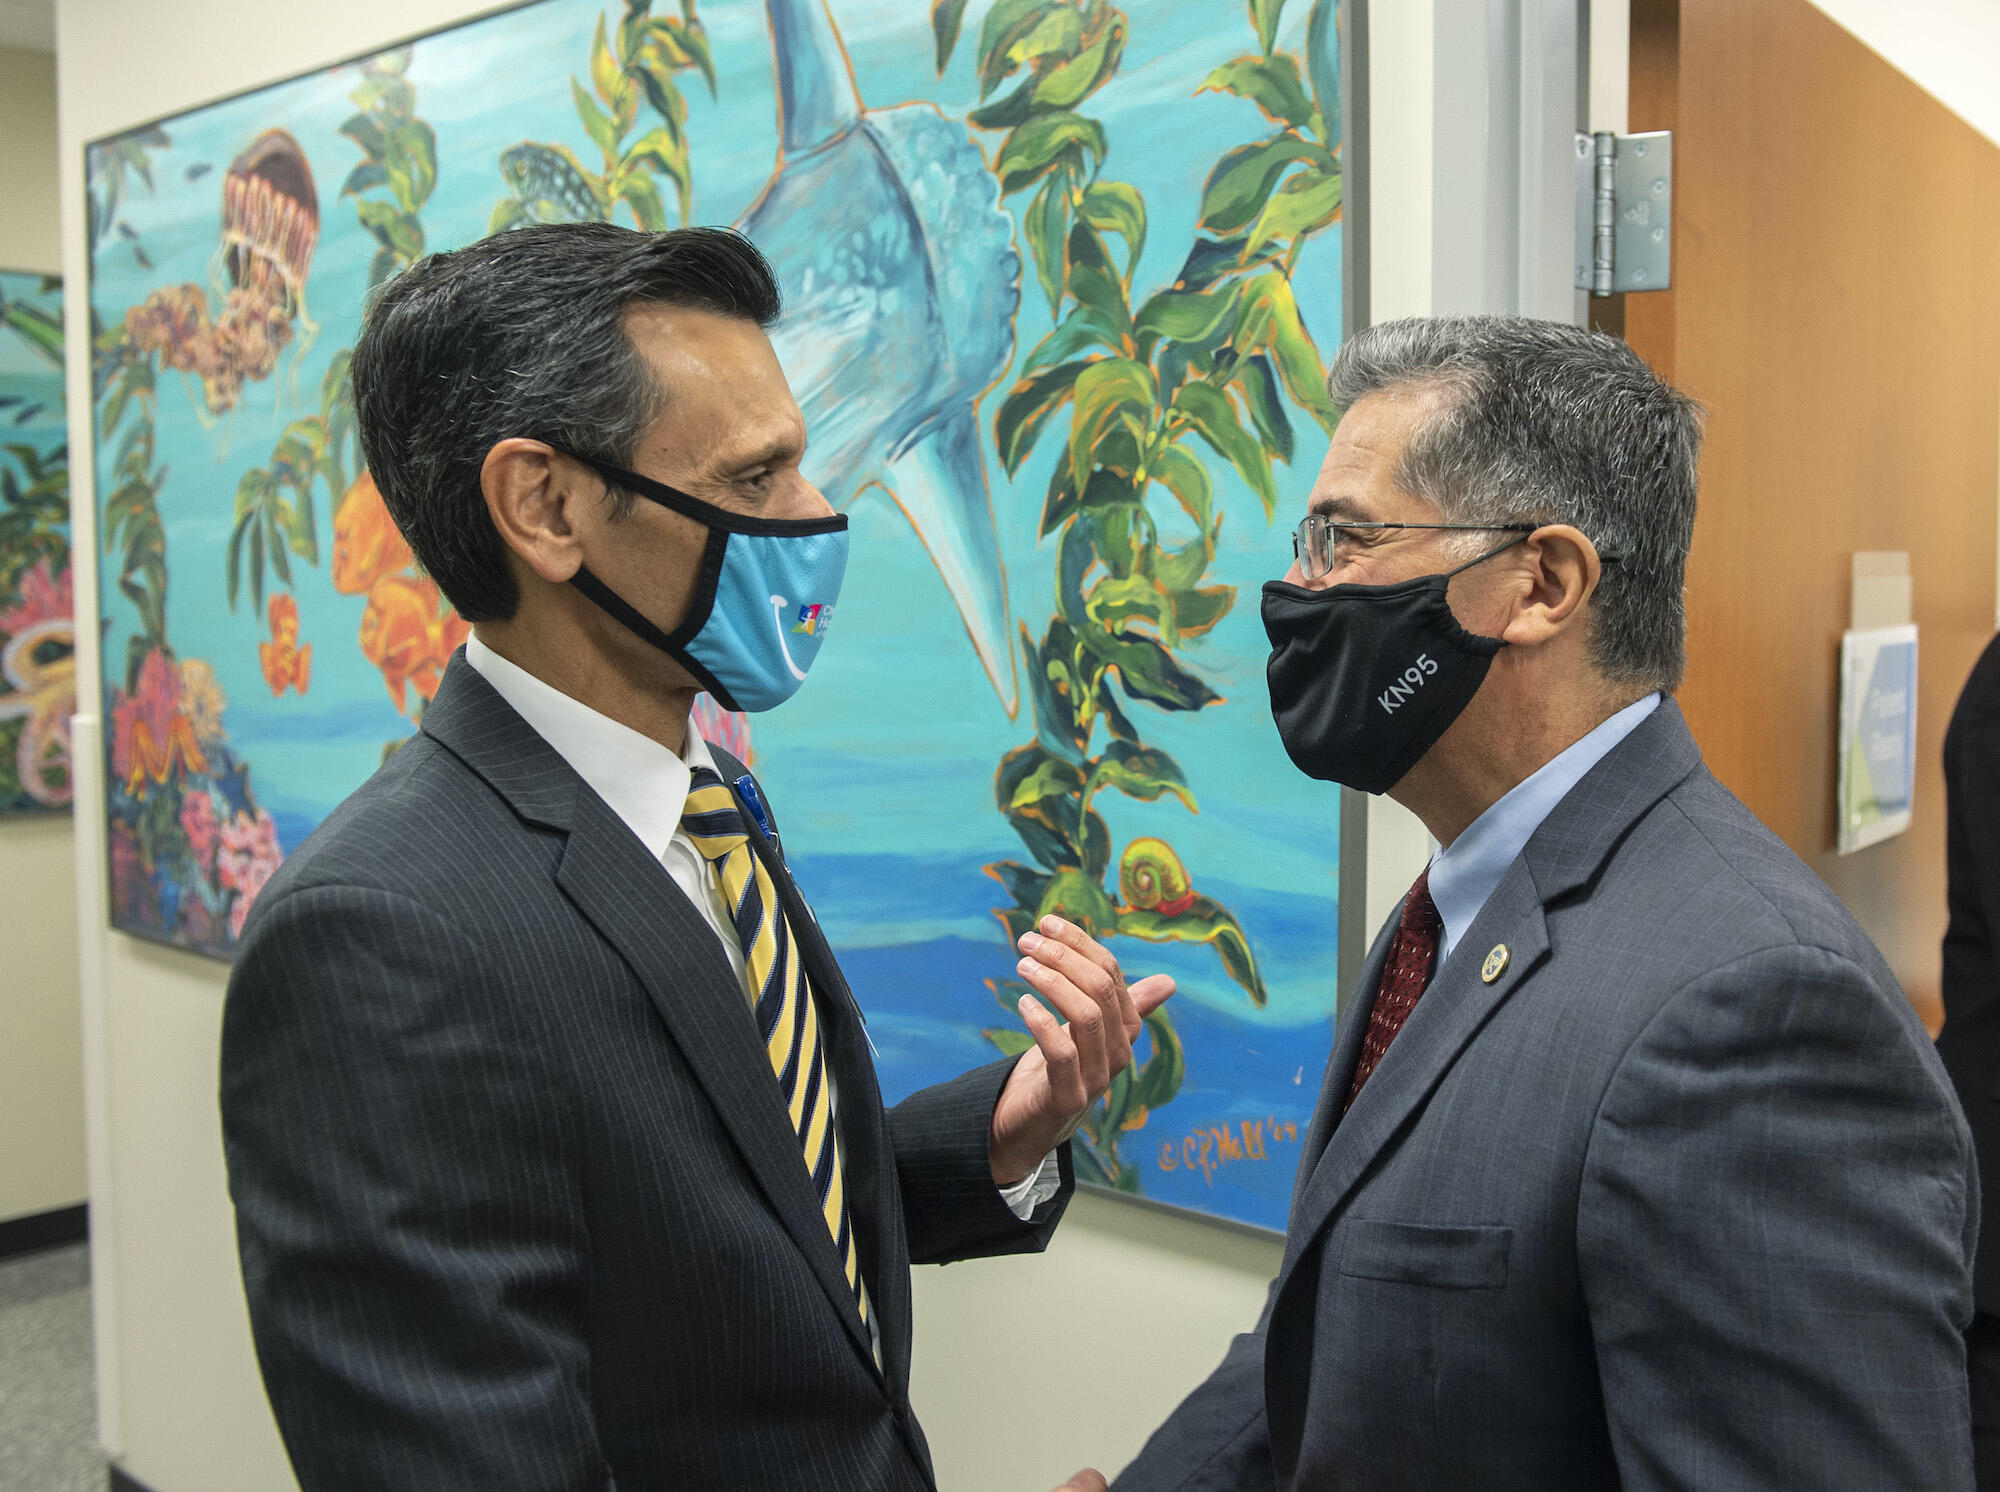 U.S. Secretary of Health and Human Services Xavier Becerra speaks with VCU President Michael Rao during Becerra's visit to Children's Hospital of Richmond at VCU.